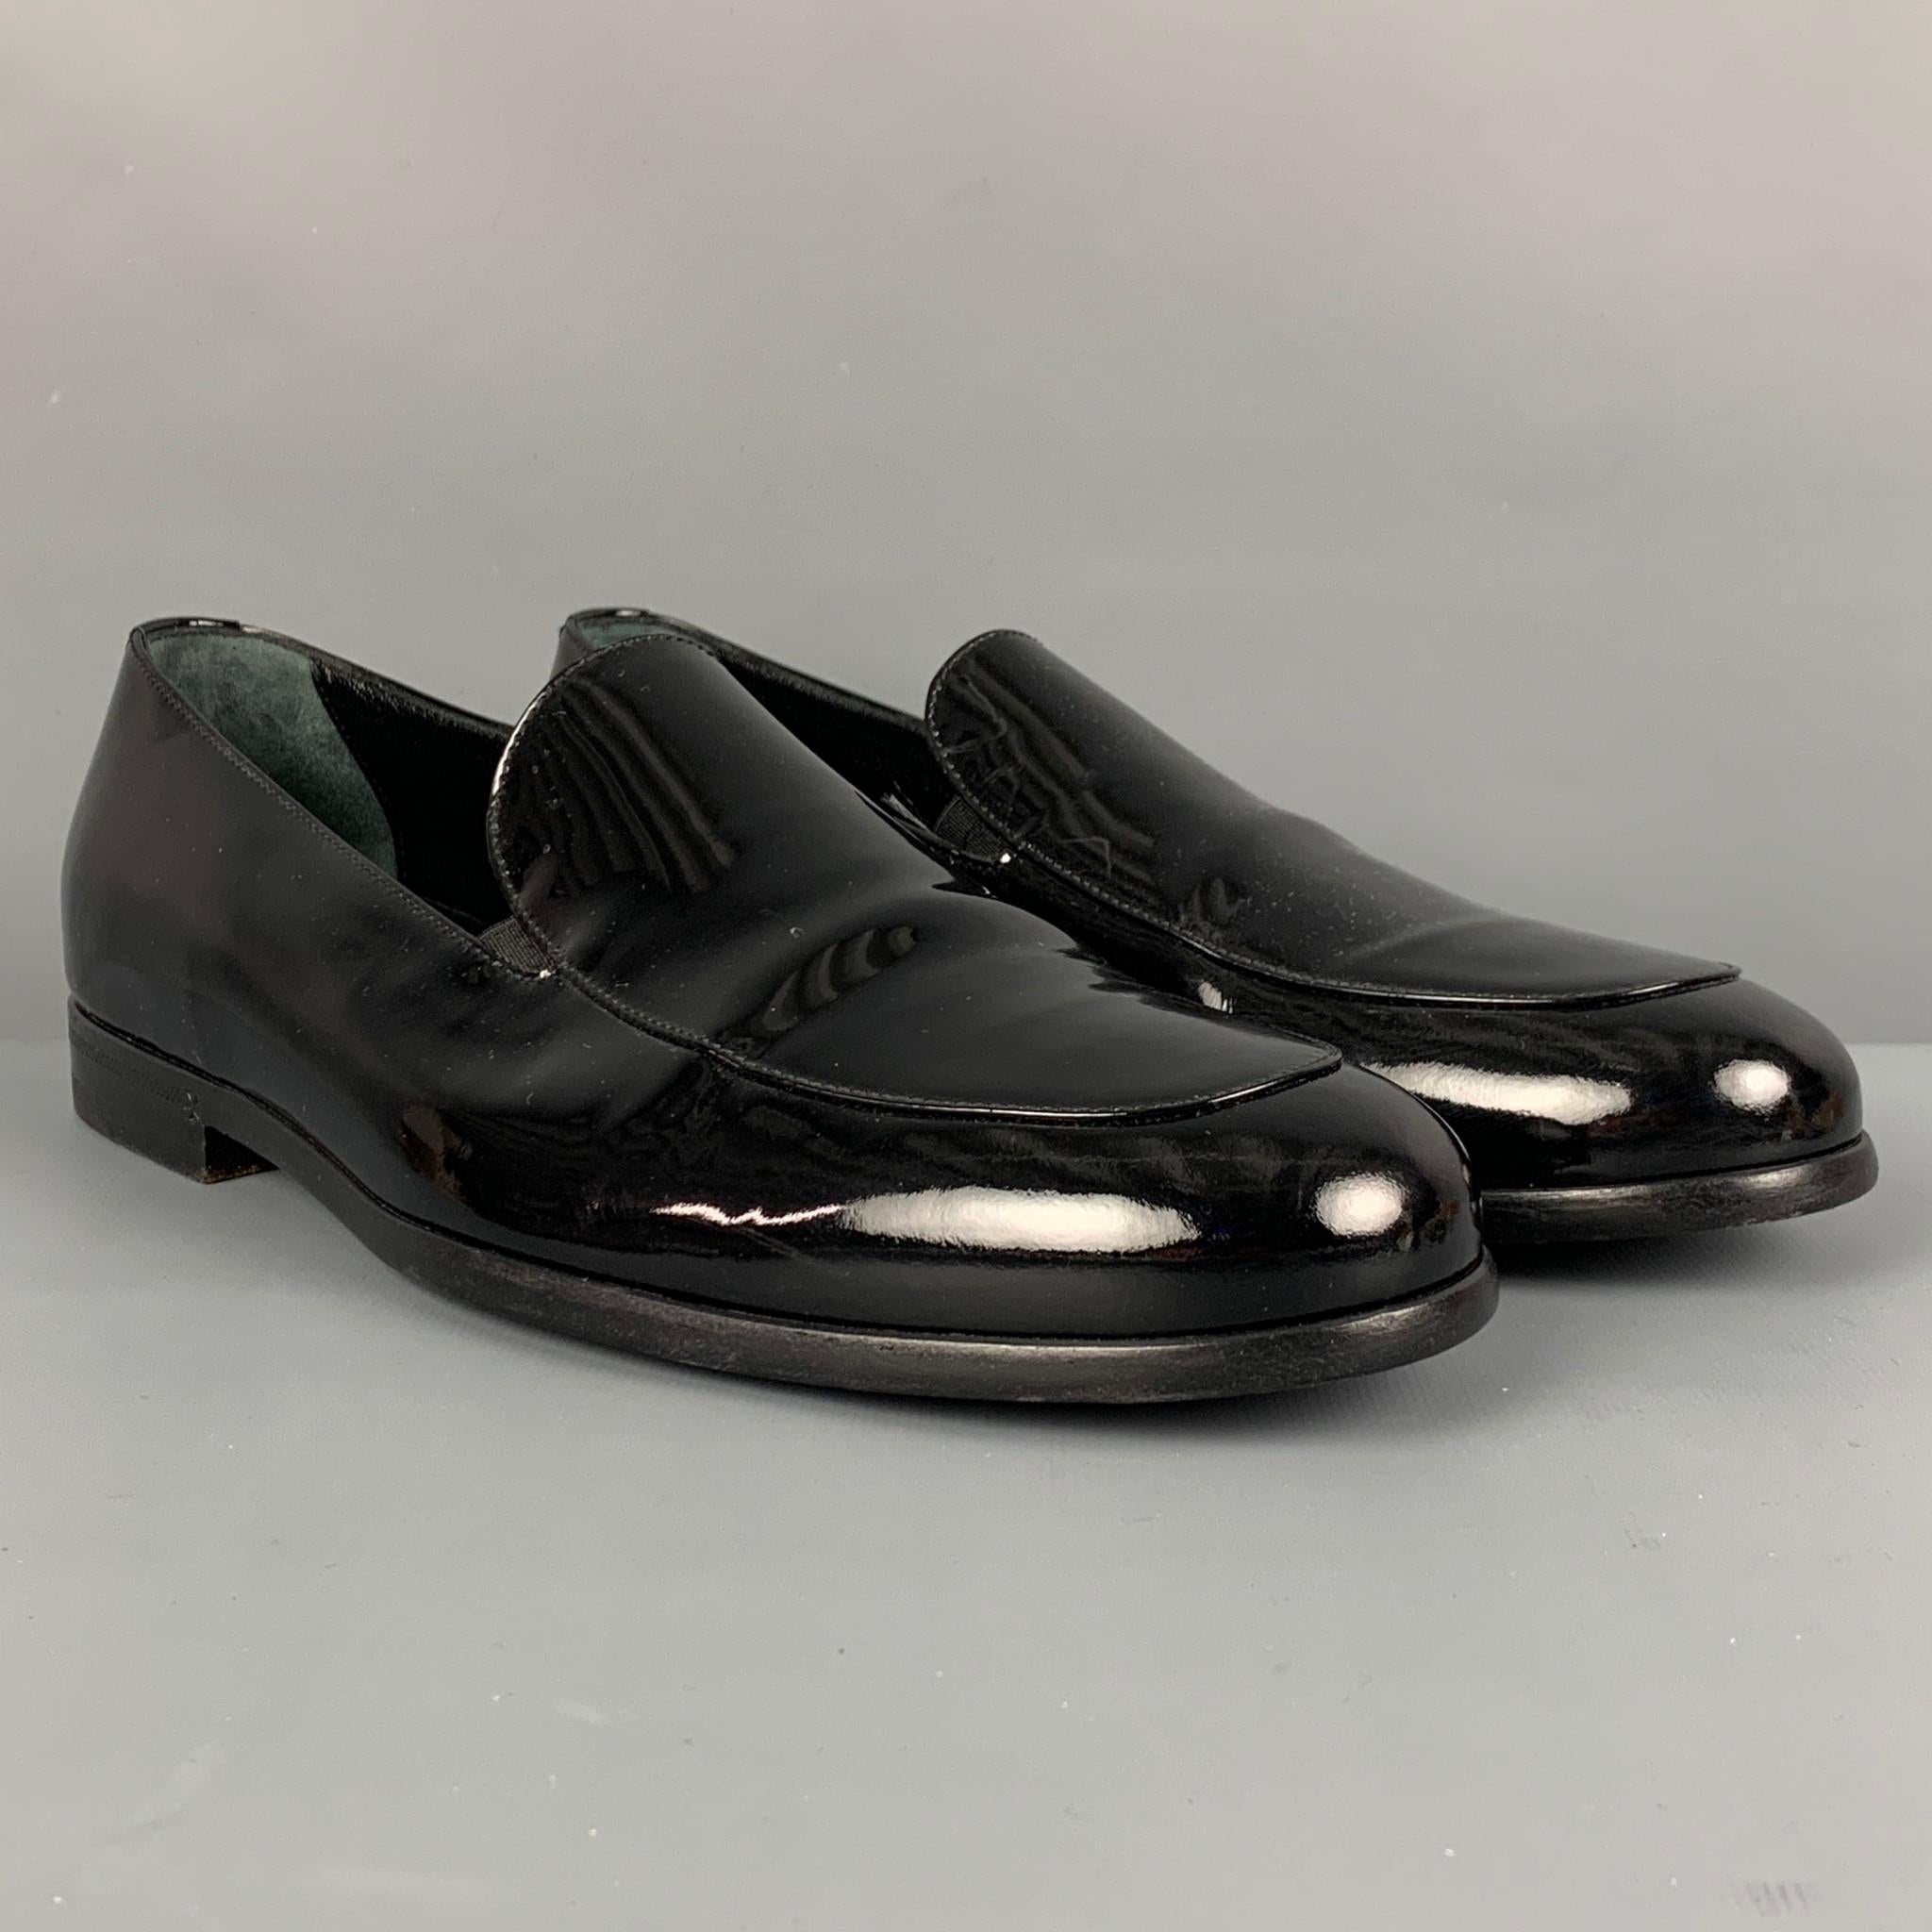 GIORGIO ARMANI loafers comes in a black patent leather featuring a slip on style. Made in Italy. 

Very Good Pre-Owned Condition.
Marked: XGU874 911 41.5

Outsole: 11.25 in. x 4 in. 